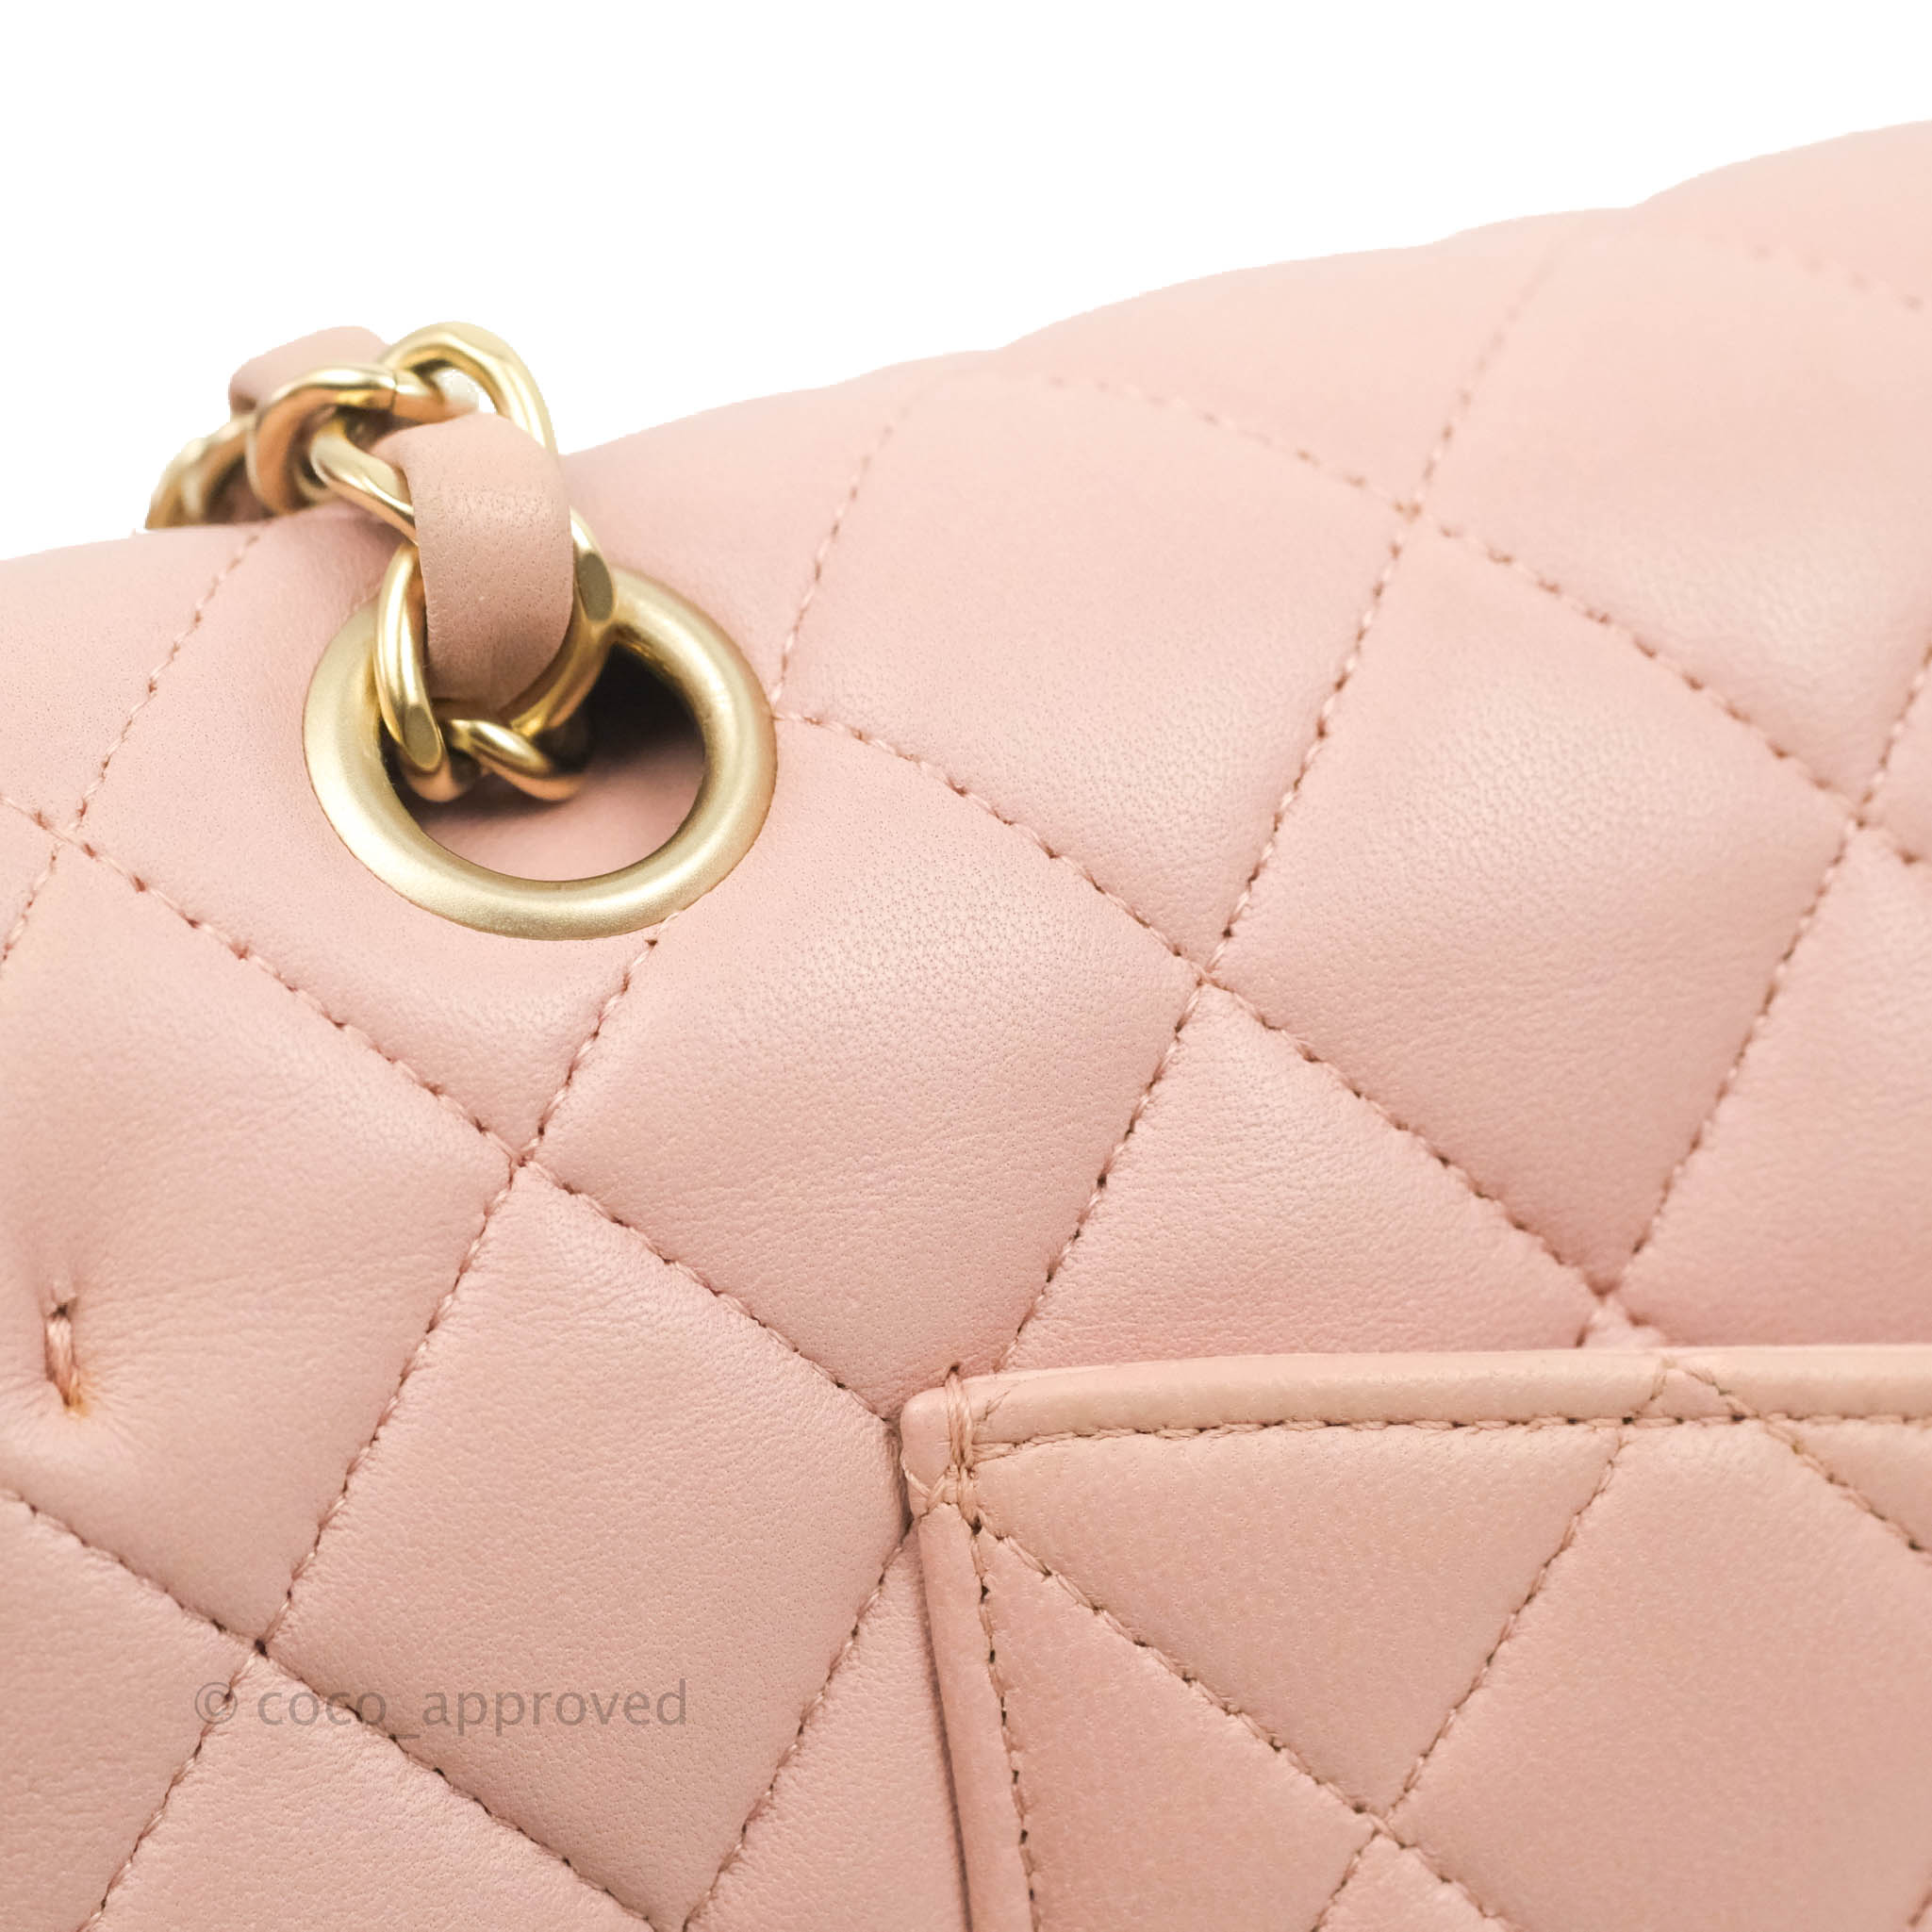 Chanel Pink Quilted Lambskin Classic Double Flap Small Q6B010E4P1000